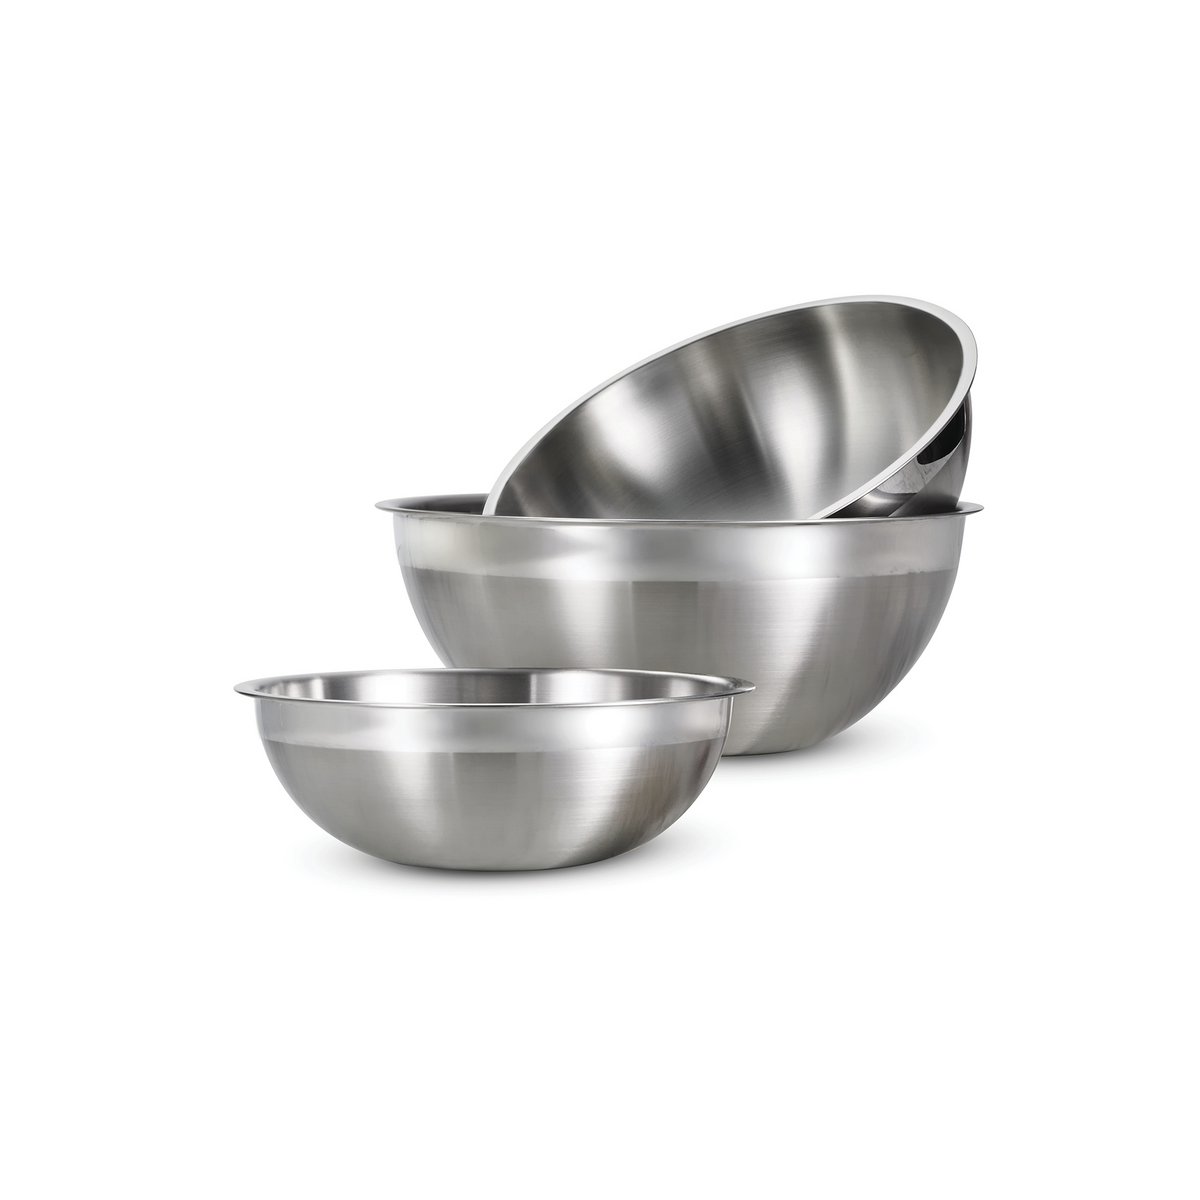 Colleta Home Stainless Steel Mixing Bowls-4 Pc set- Stackable Nesting Bowls  - Polished Matte Finish - Cookware Set